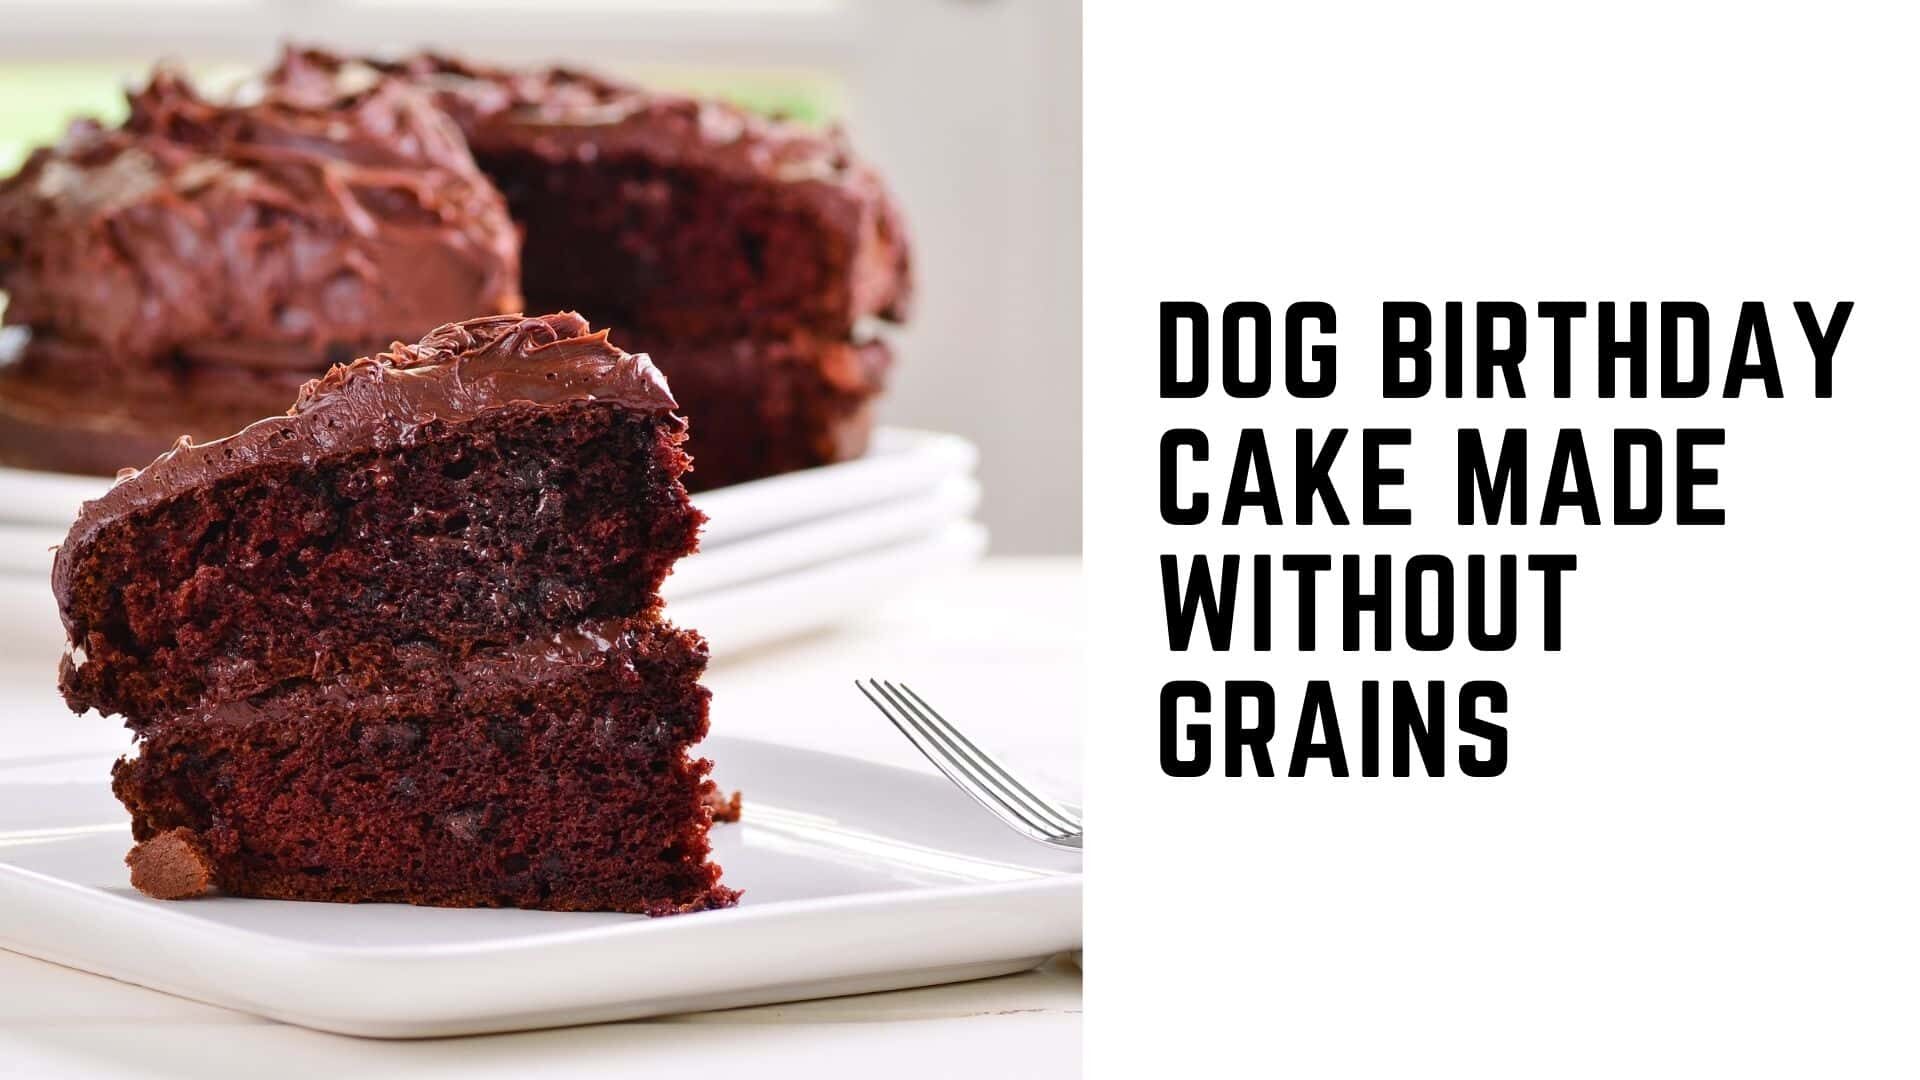 Dog birthday cake made without grains